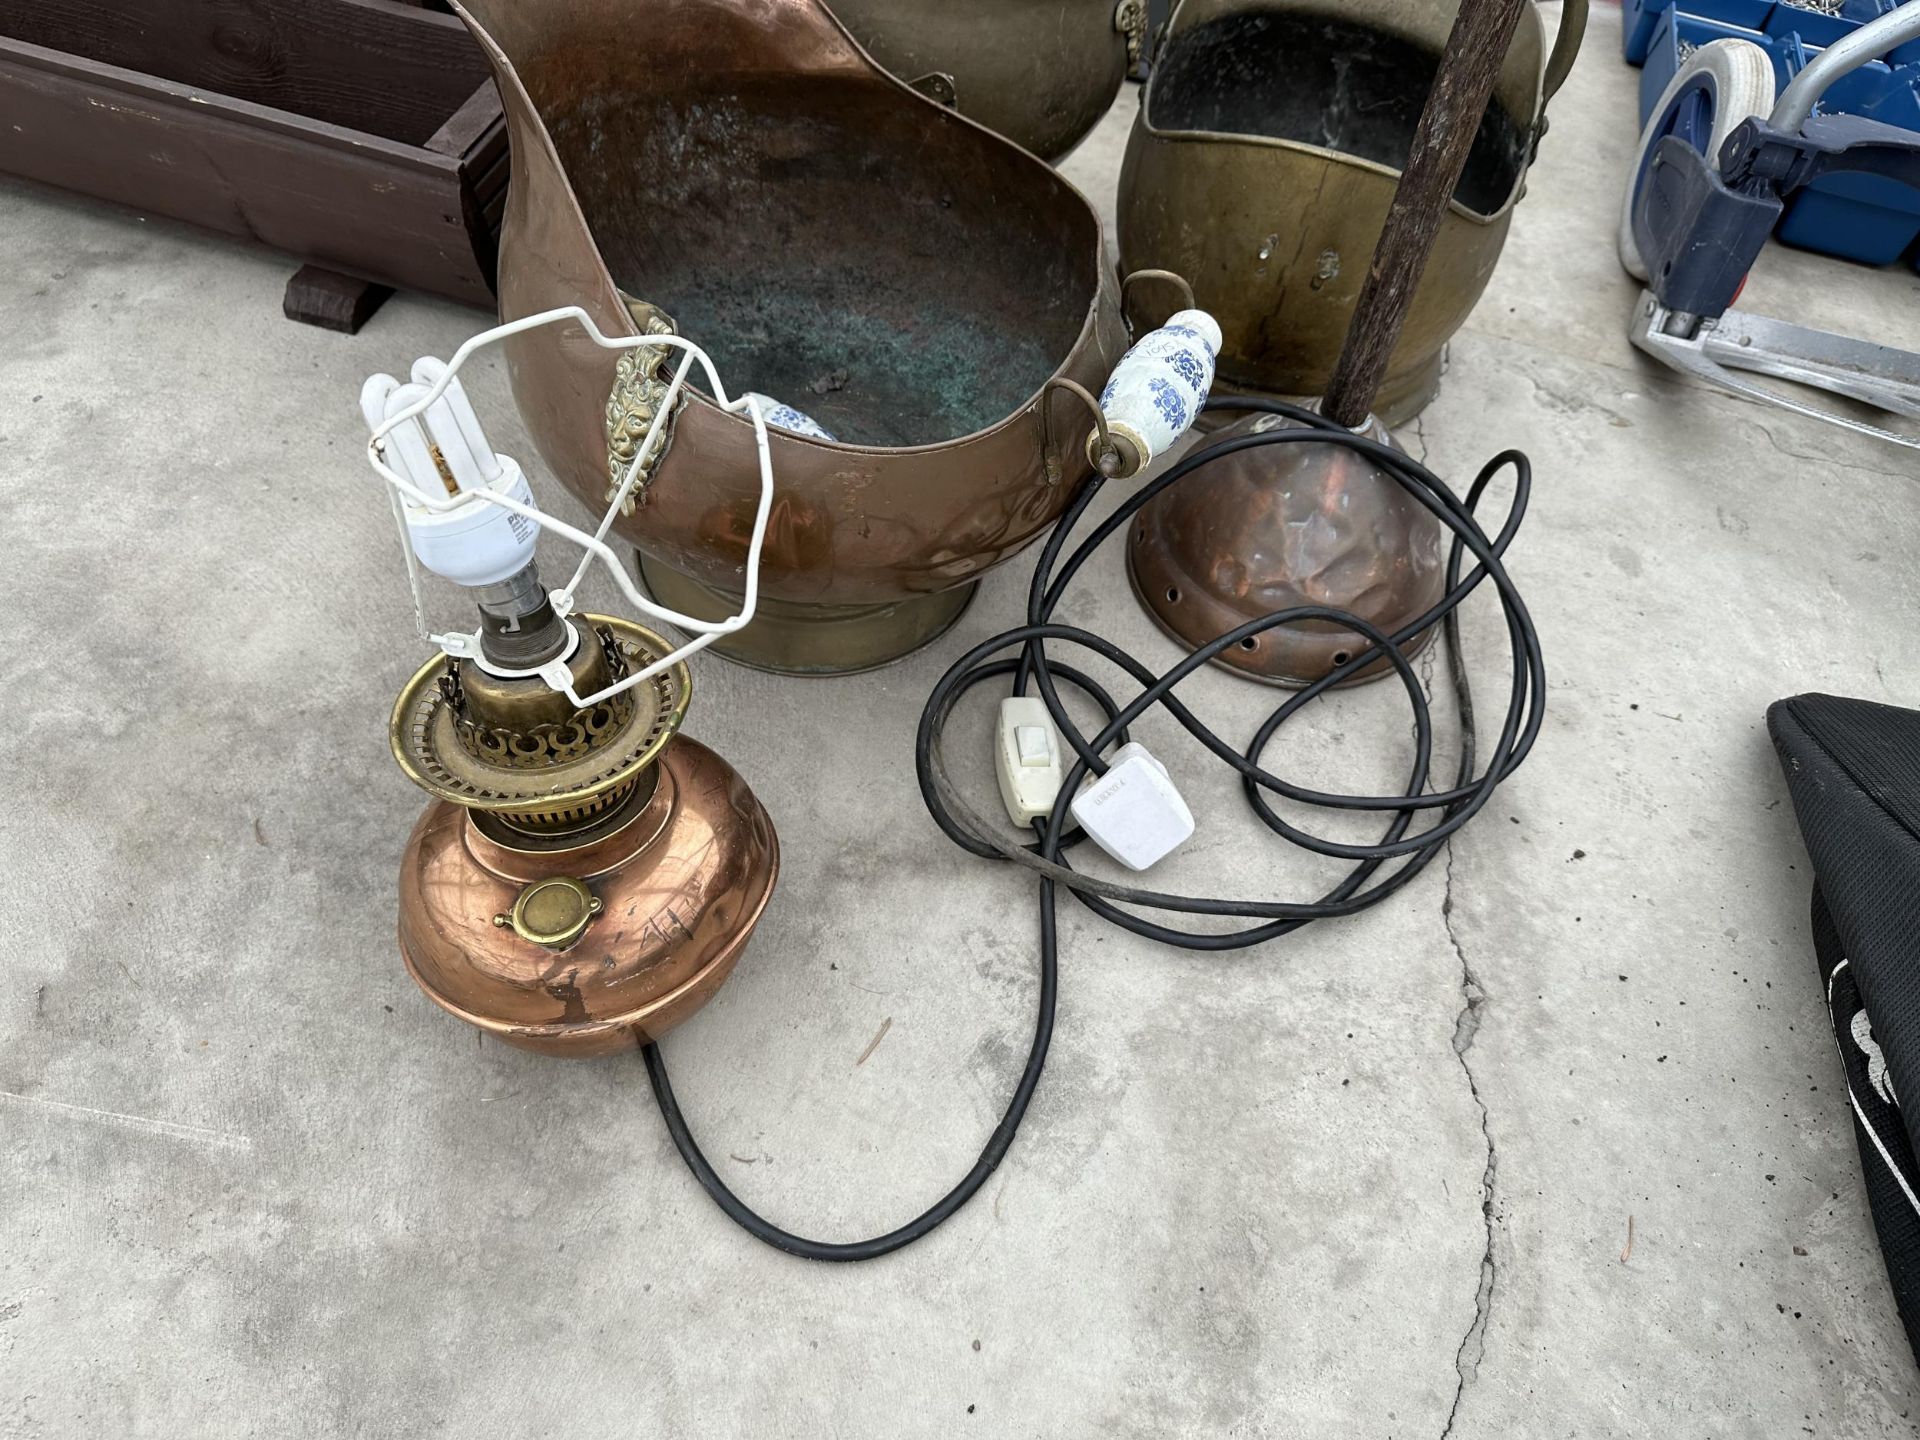 TWO BRASS COAL BUCKETS, A COPPER COAL BUCKET, A LAMP AND A COPPER POSSER - Image 3 of 3